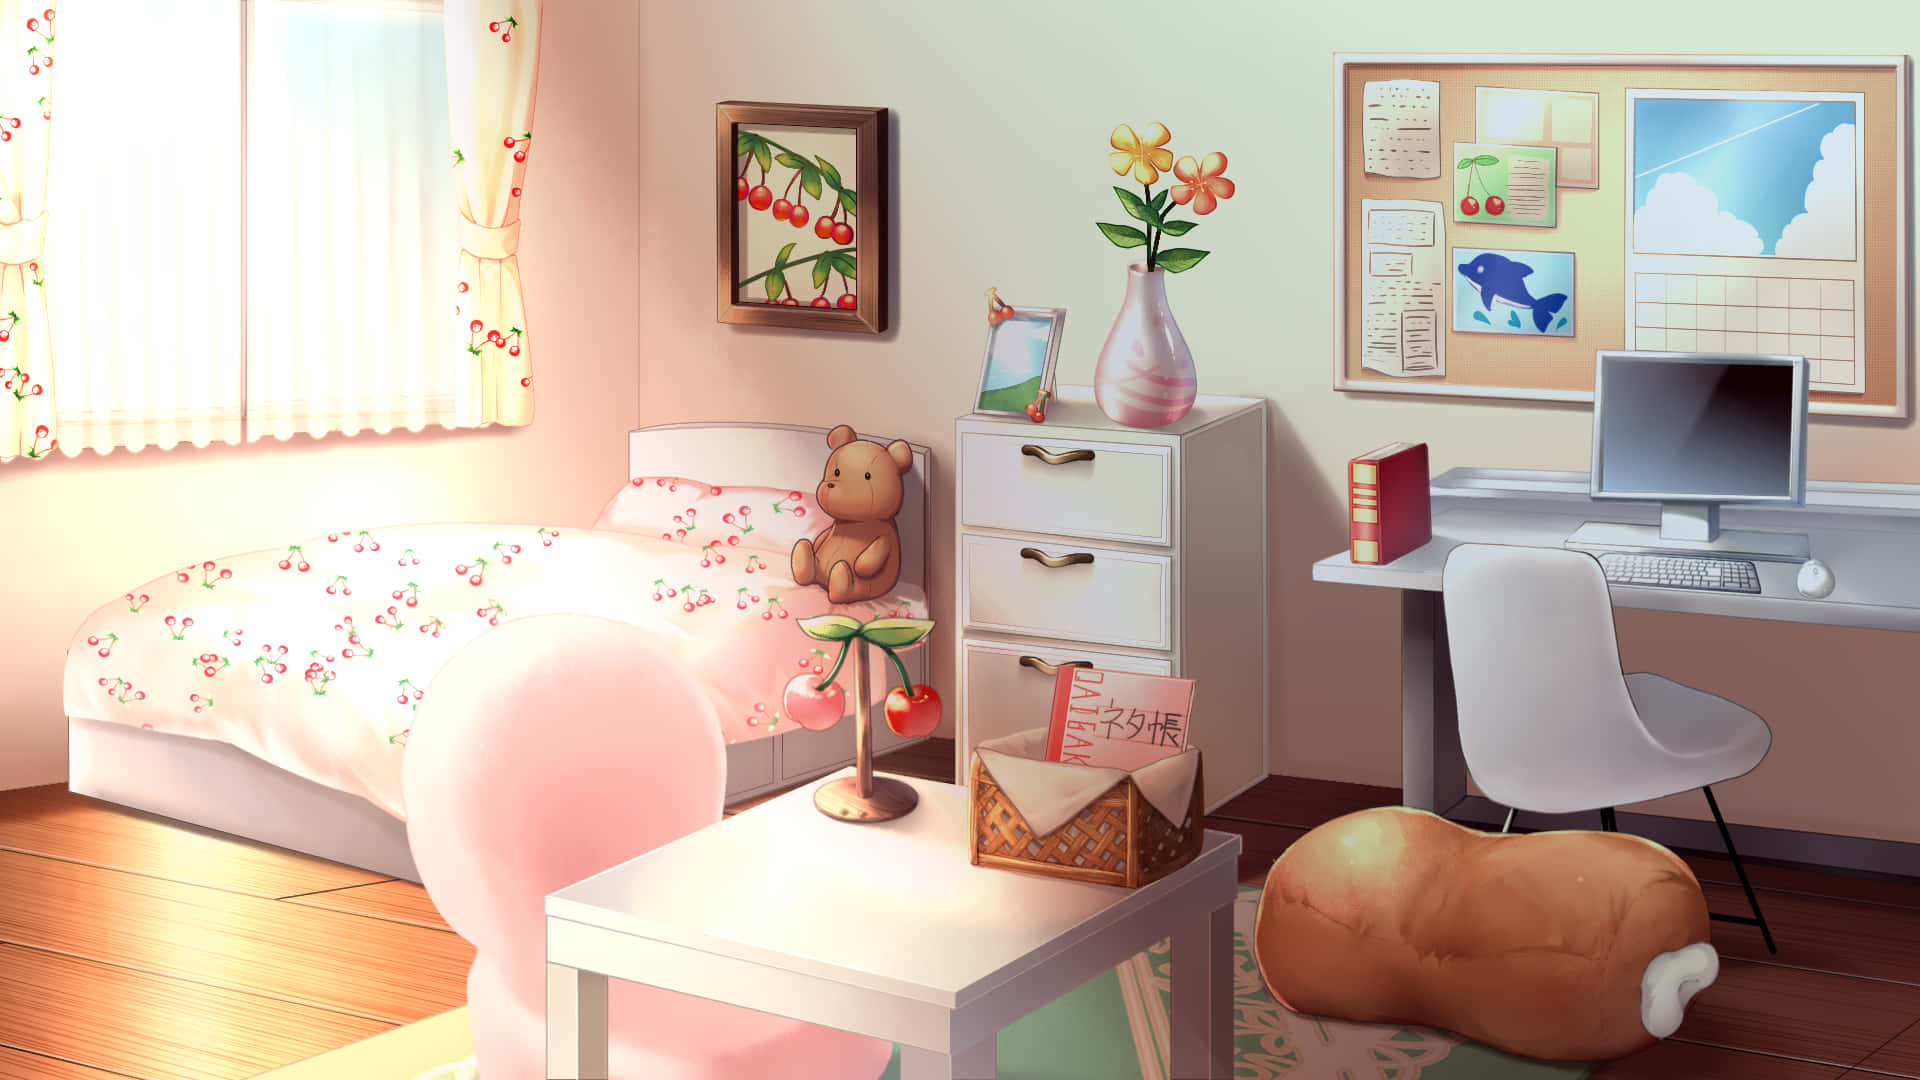 Get lost in the cuteness of this anime inspired bedroom!